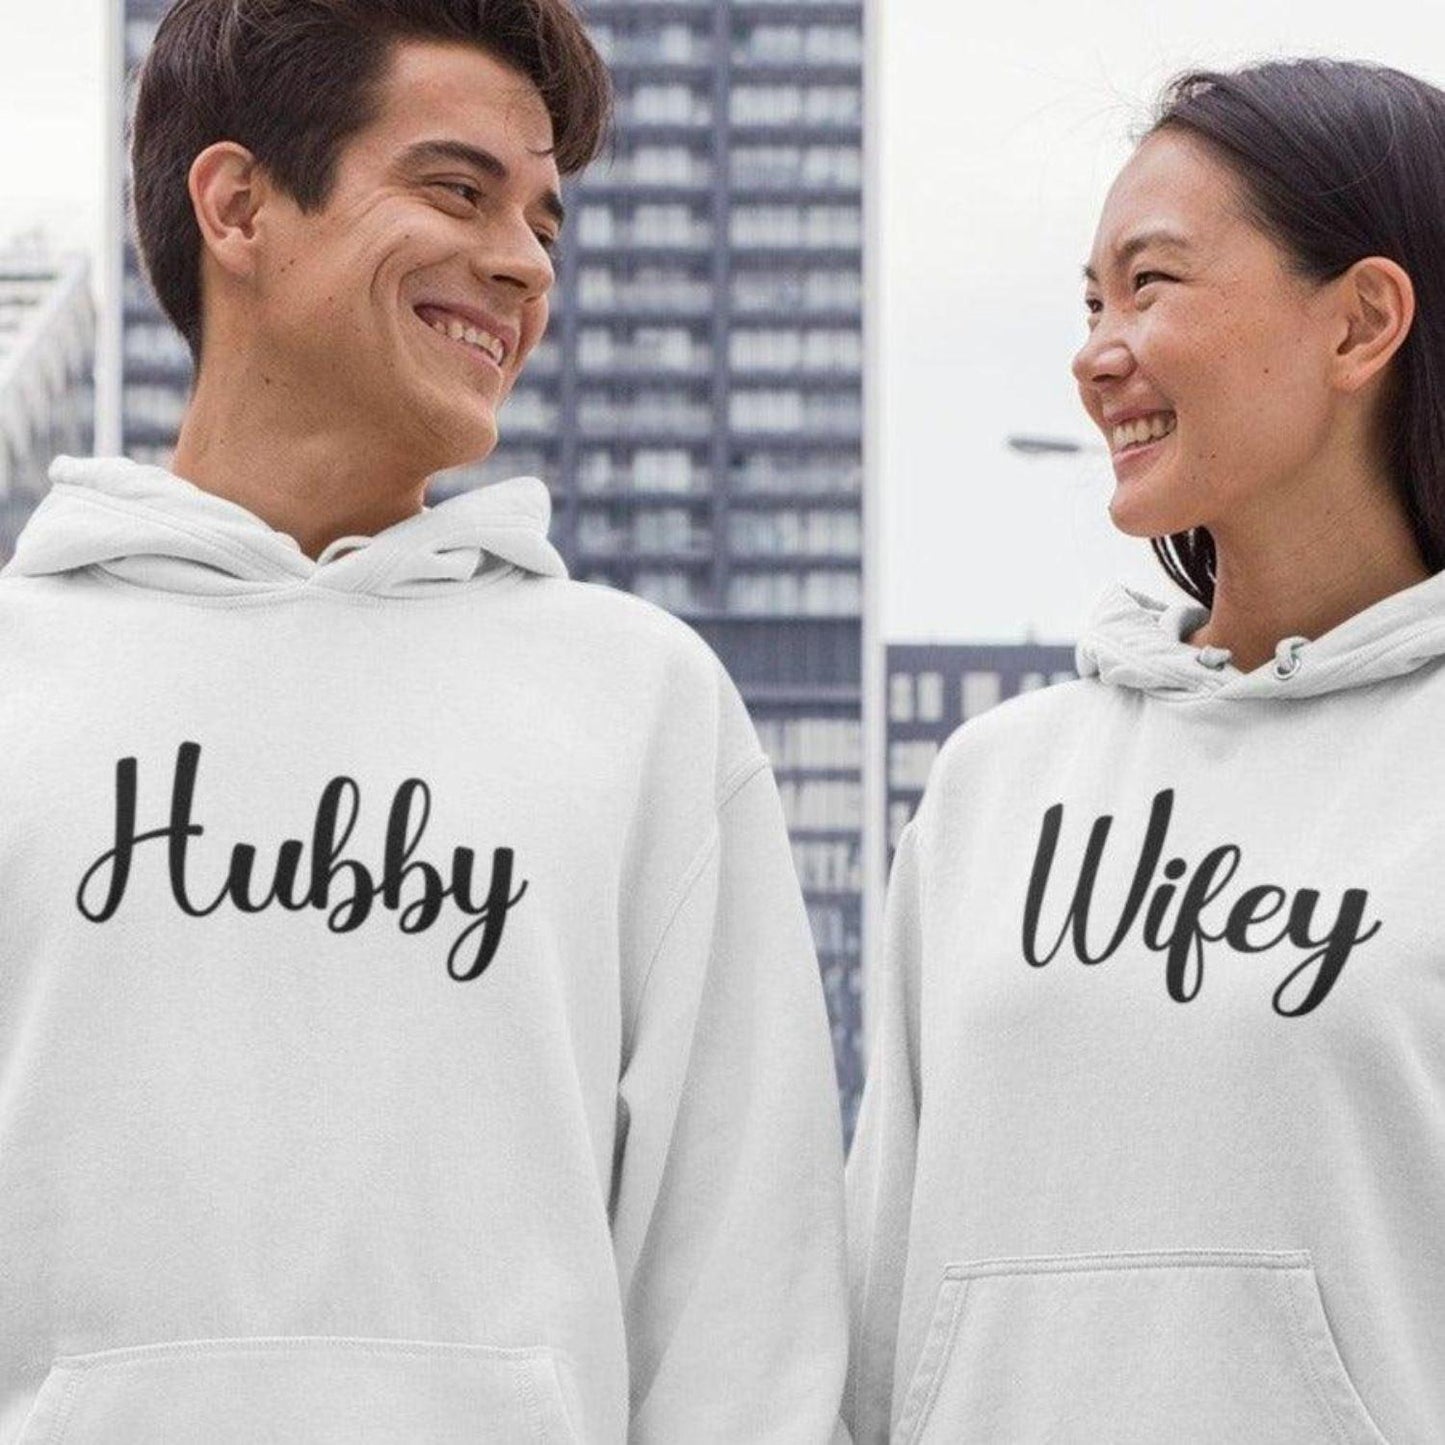 Hubby and Wifey Matching Set - Perfect Couple's Gift! - 4Lovebirds